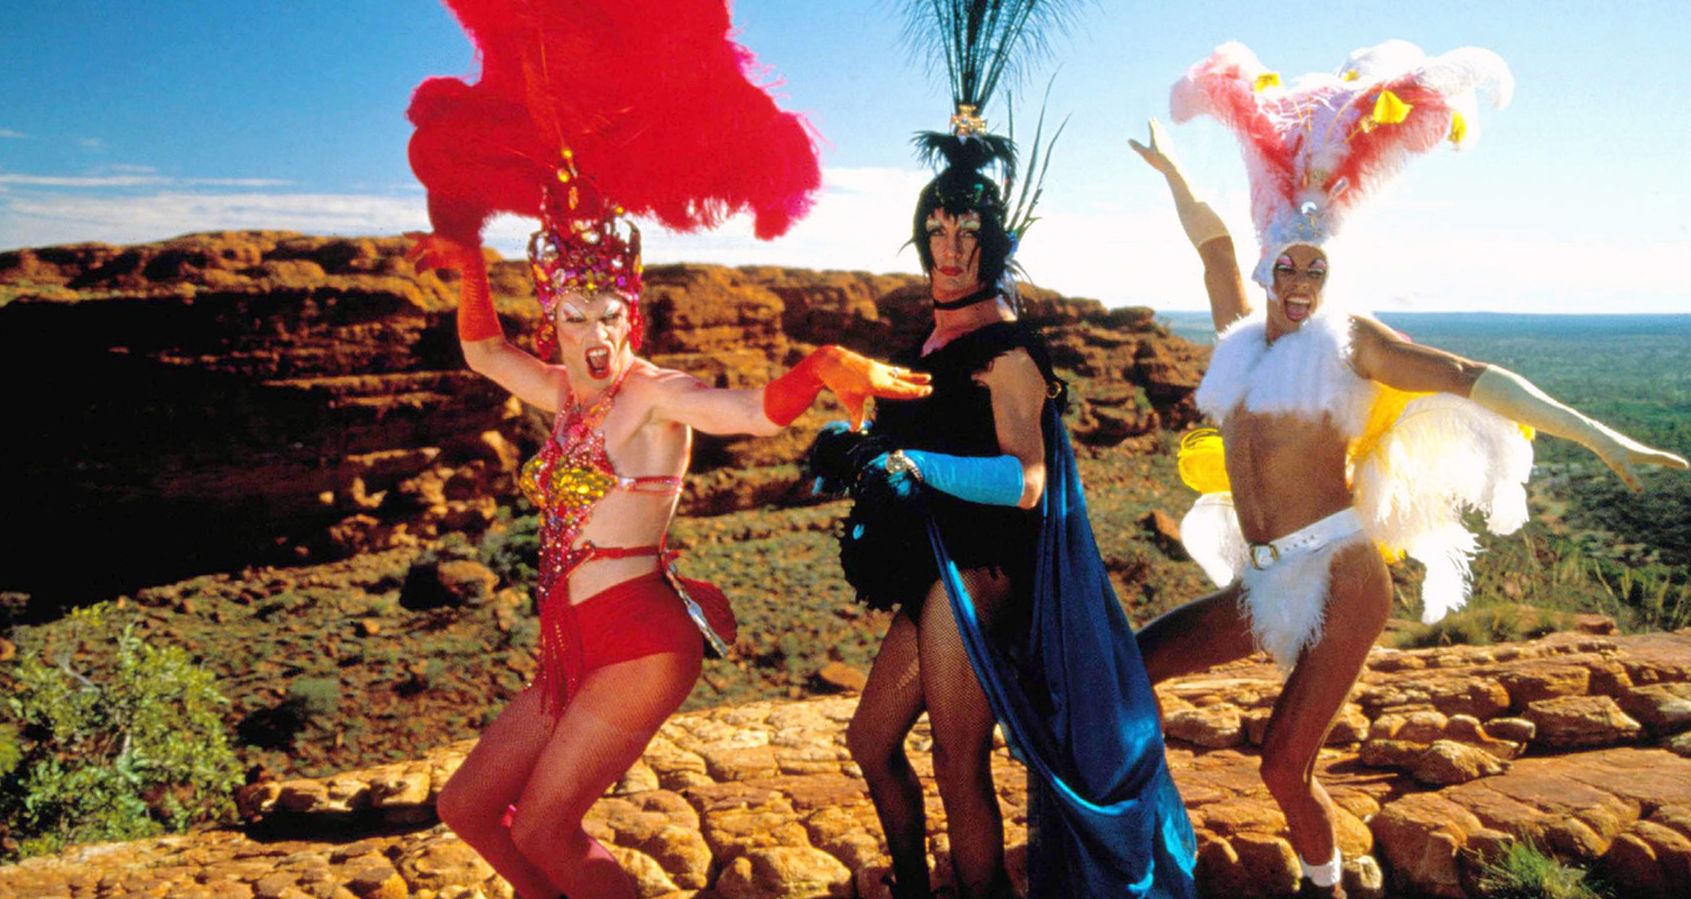 ‘Working with Kylie Minogue was a long time coming’: director of Priscilla on his new film